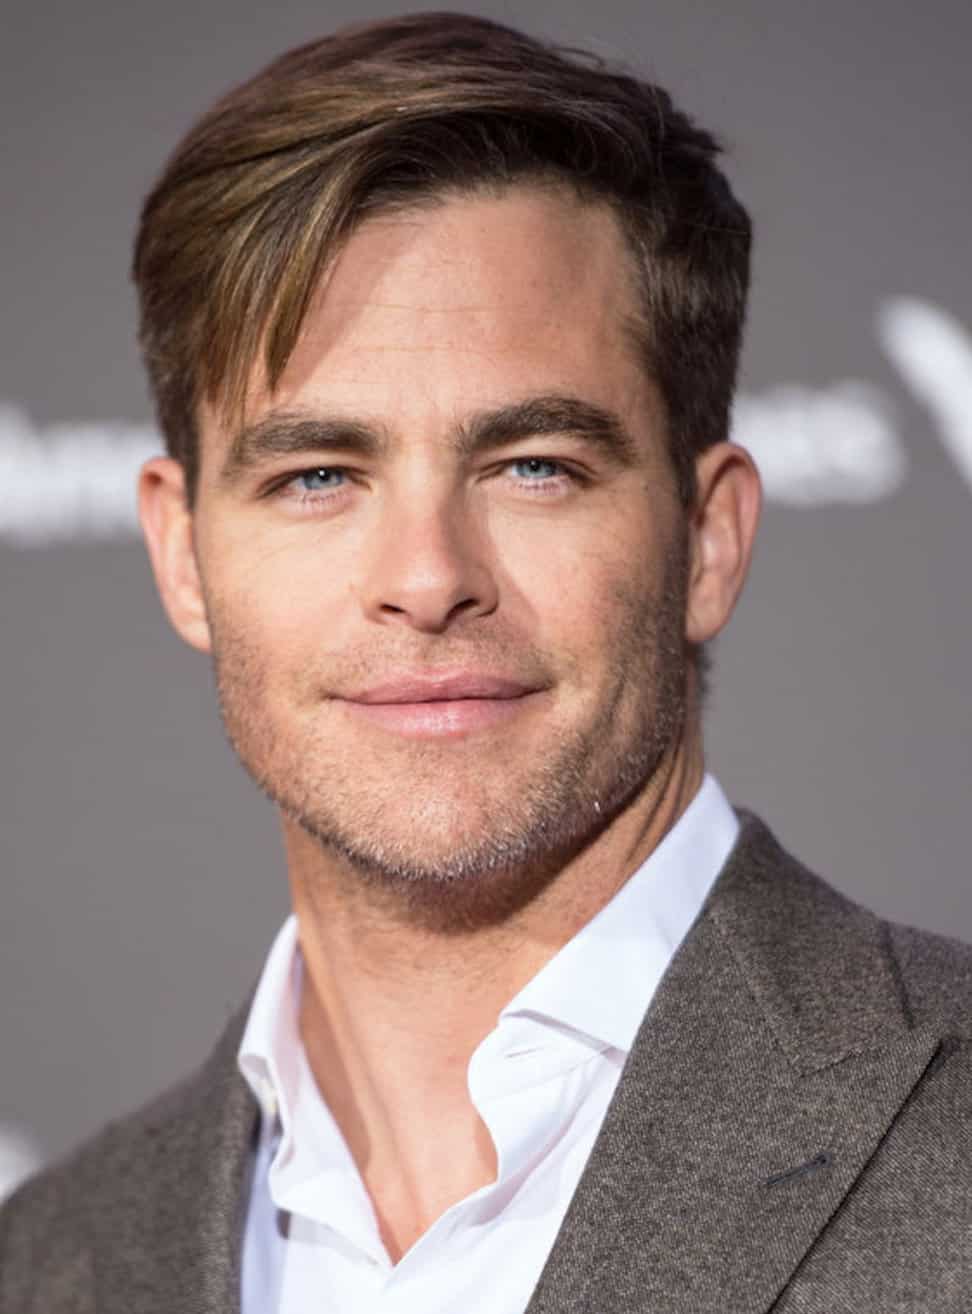 All The Old Knives | Agenten Film mit Chris Pine